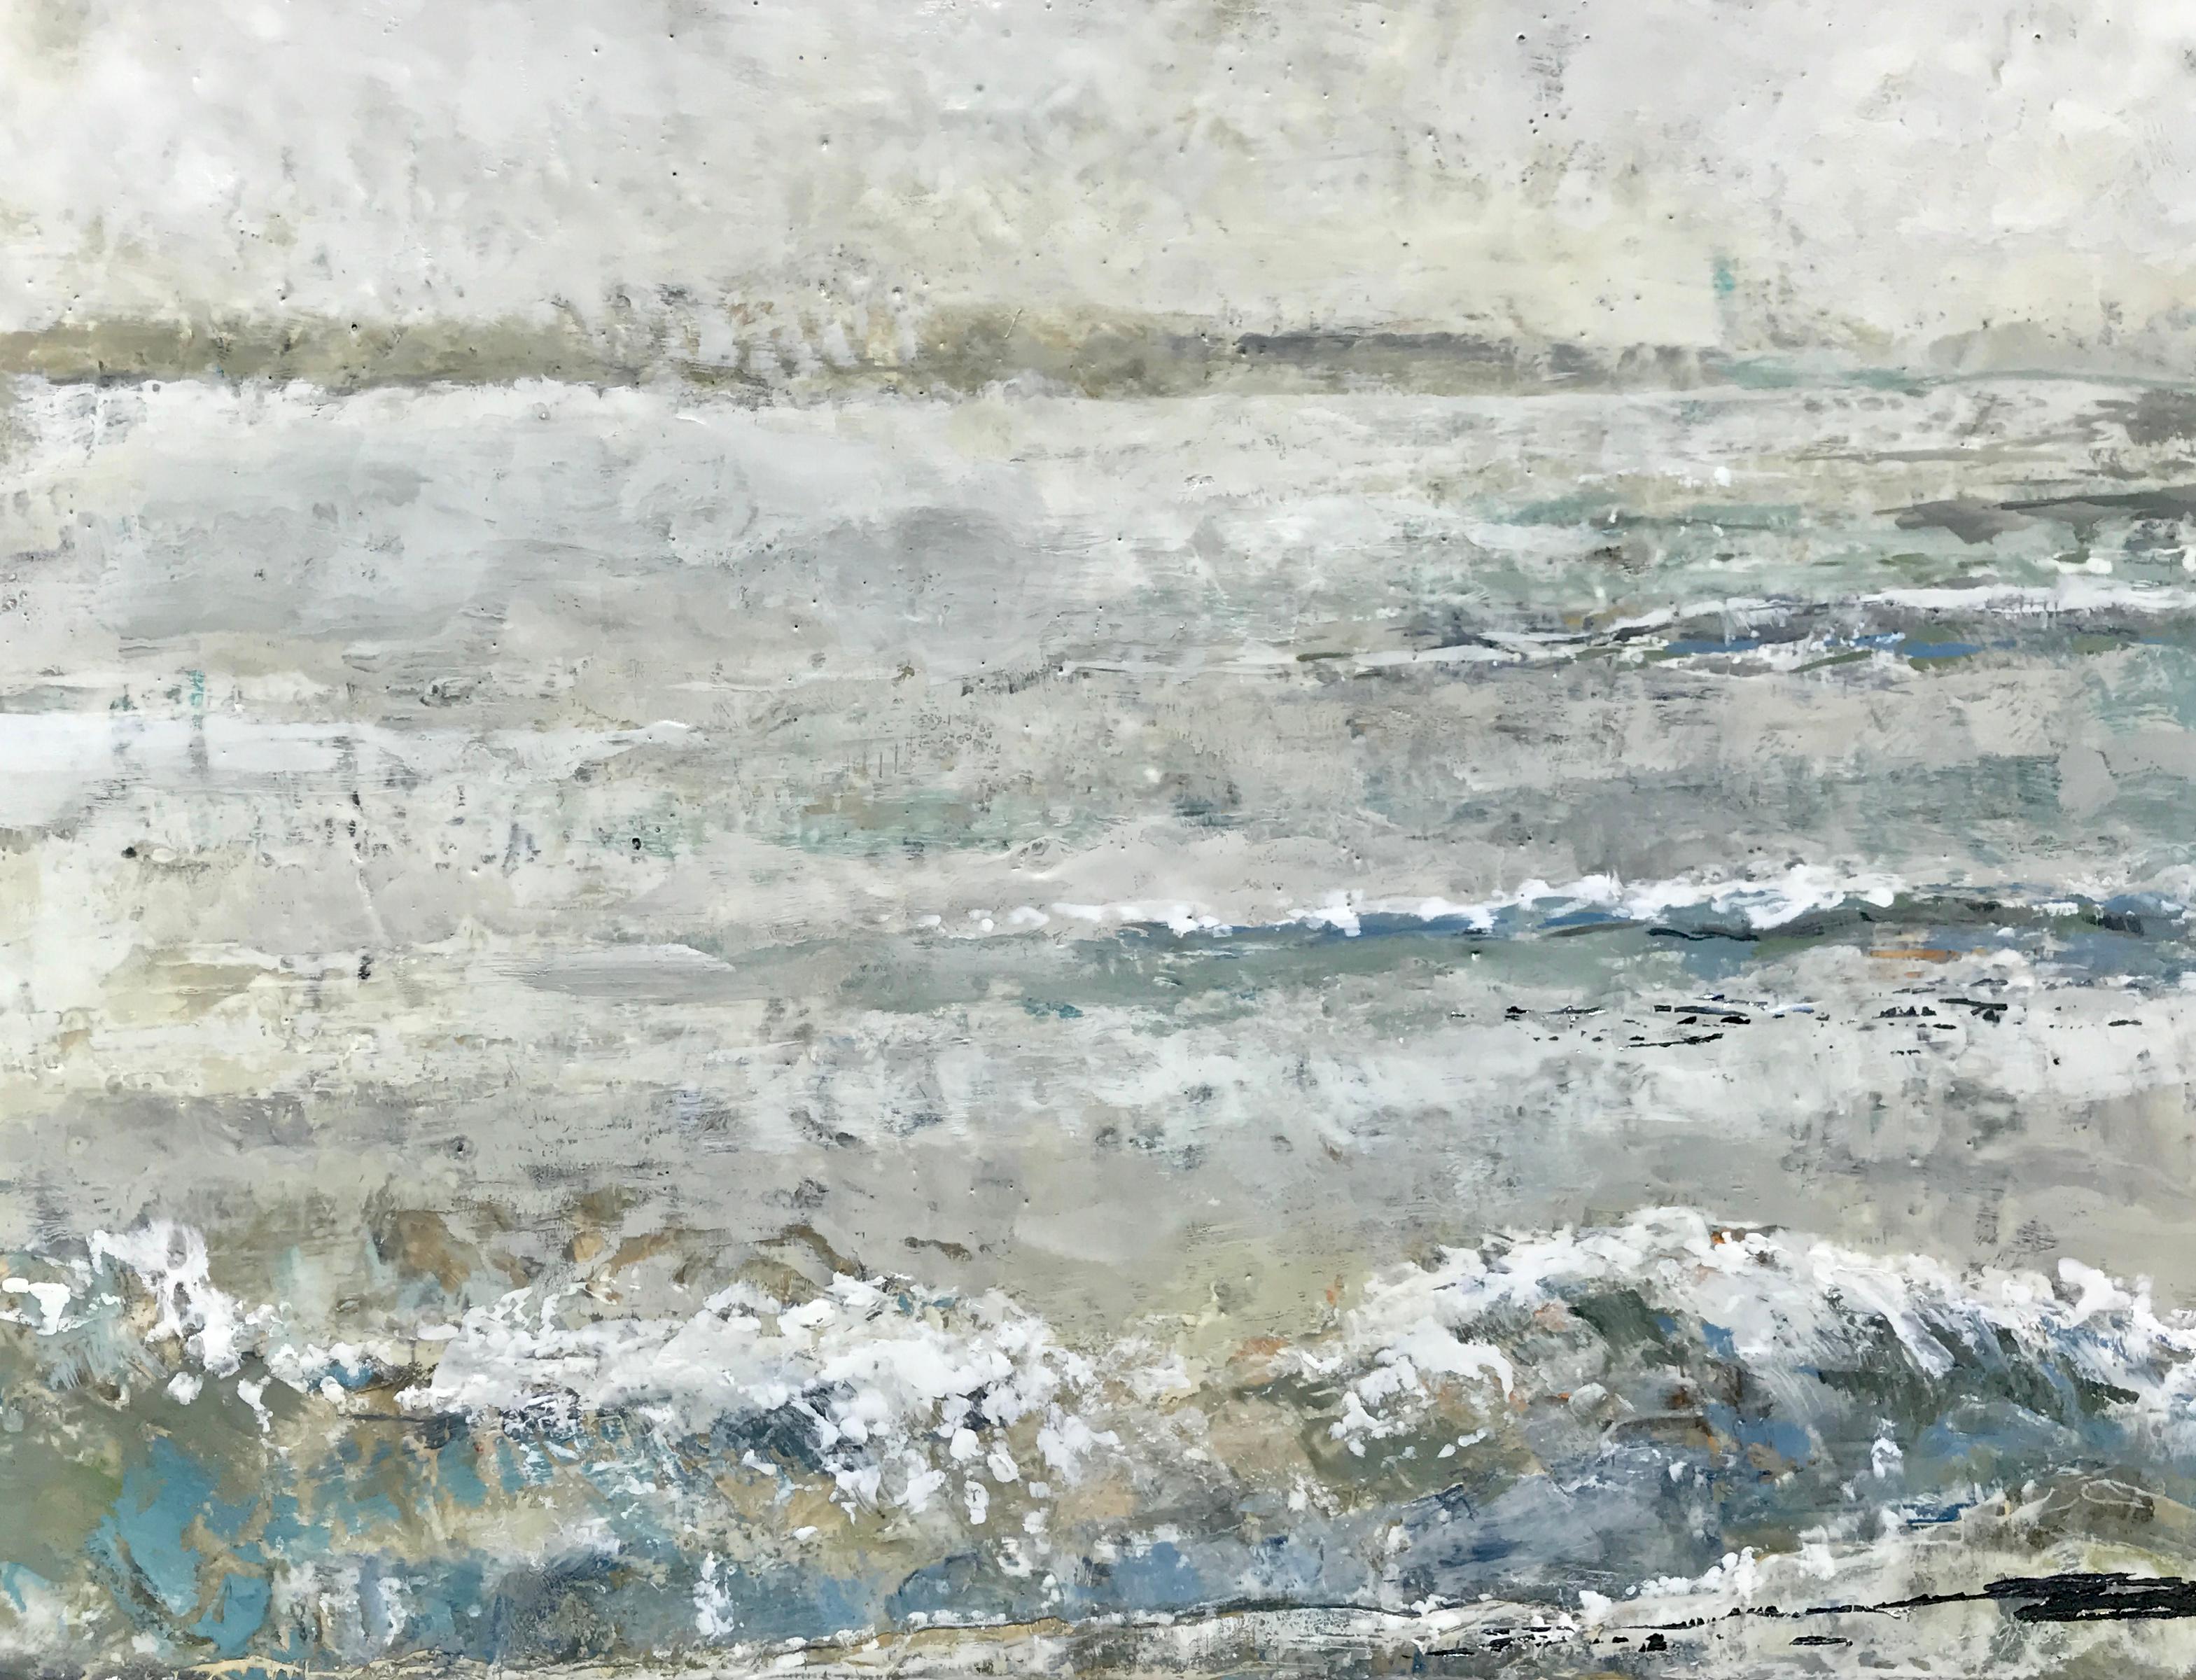 'Sea Clearly' is a framed abstract encaustic on board painting created by American artist Maureen Naughton in 2018. Featuring a soft palette mostly made of white, grey and blue tones, the painting is an abstract depiction of a seascape. The sky is